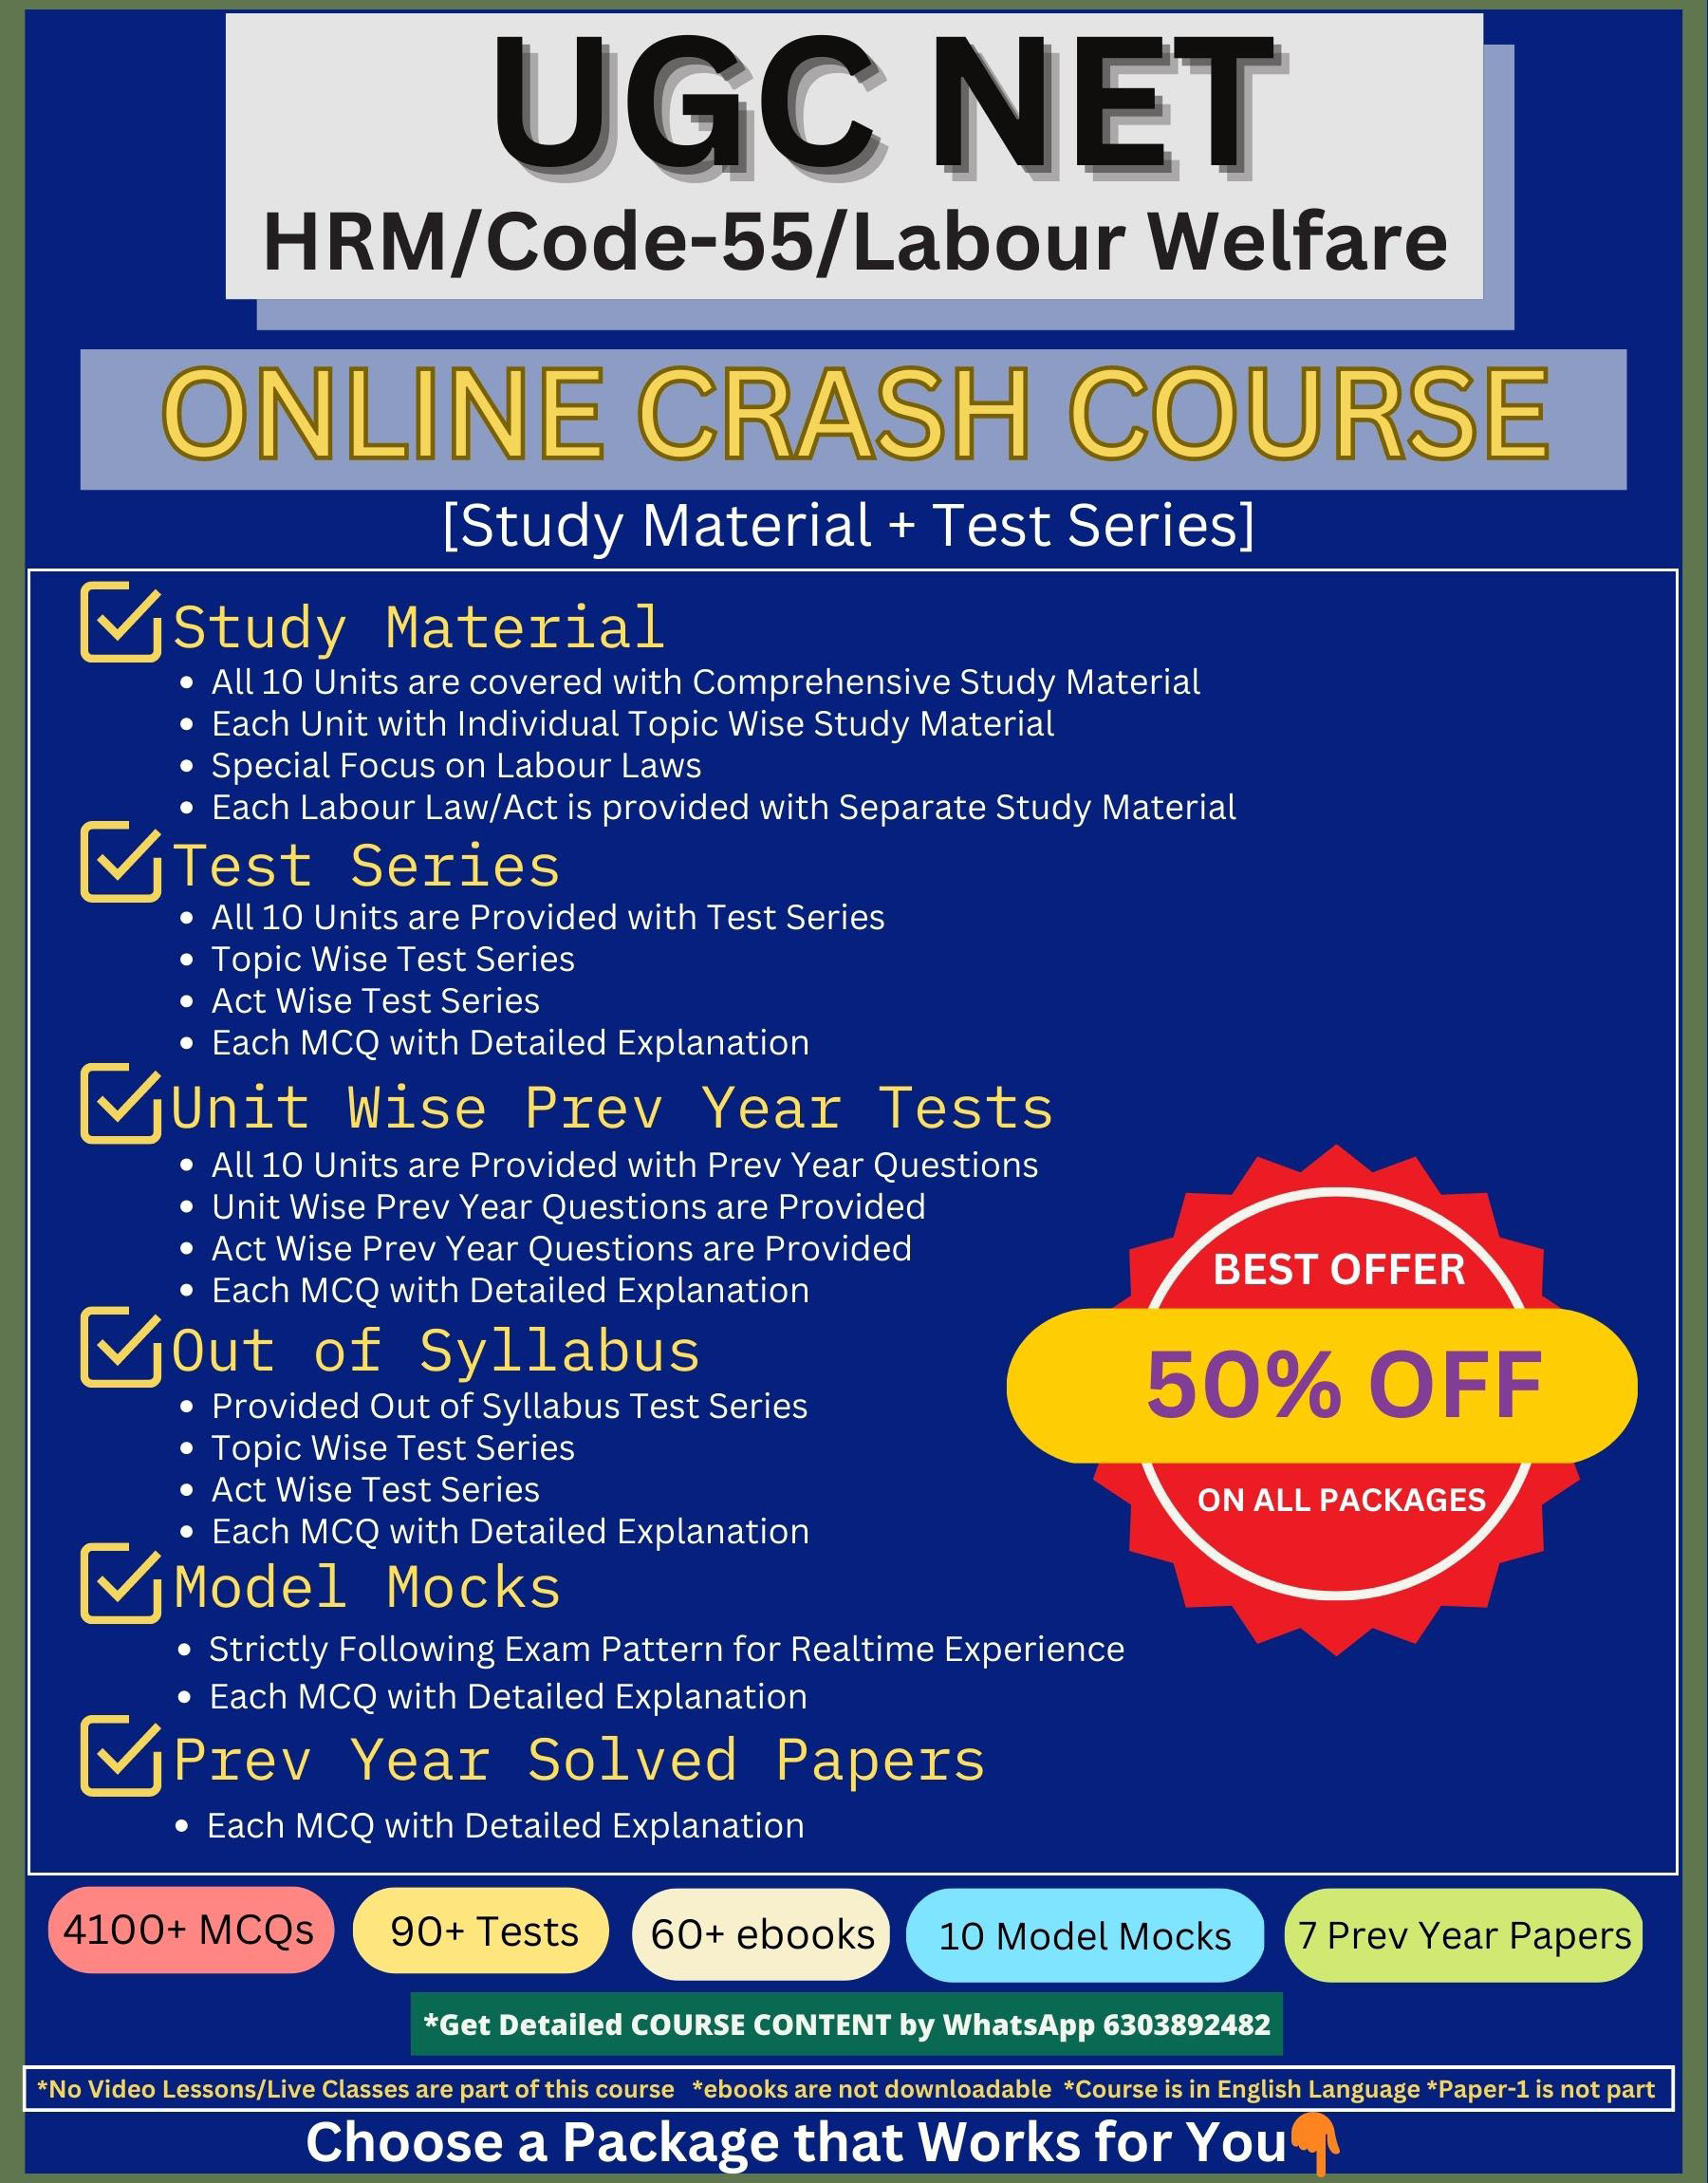 Online course with test series and study materials for UGC NET HRM Code55 Labour welfare Industrial relations